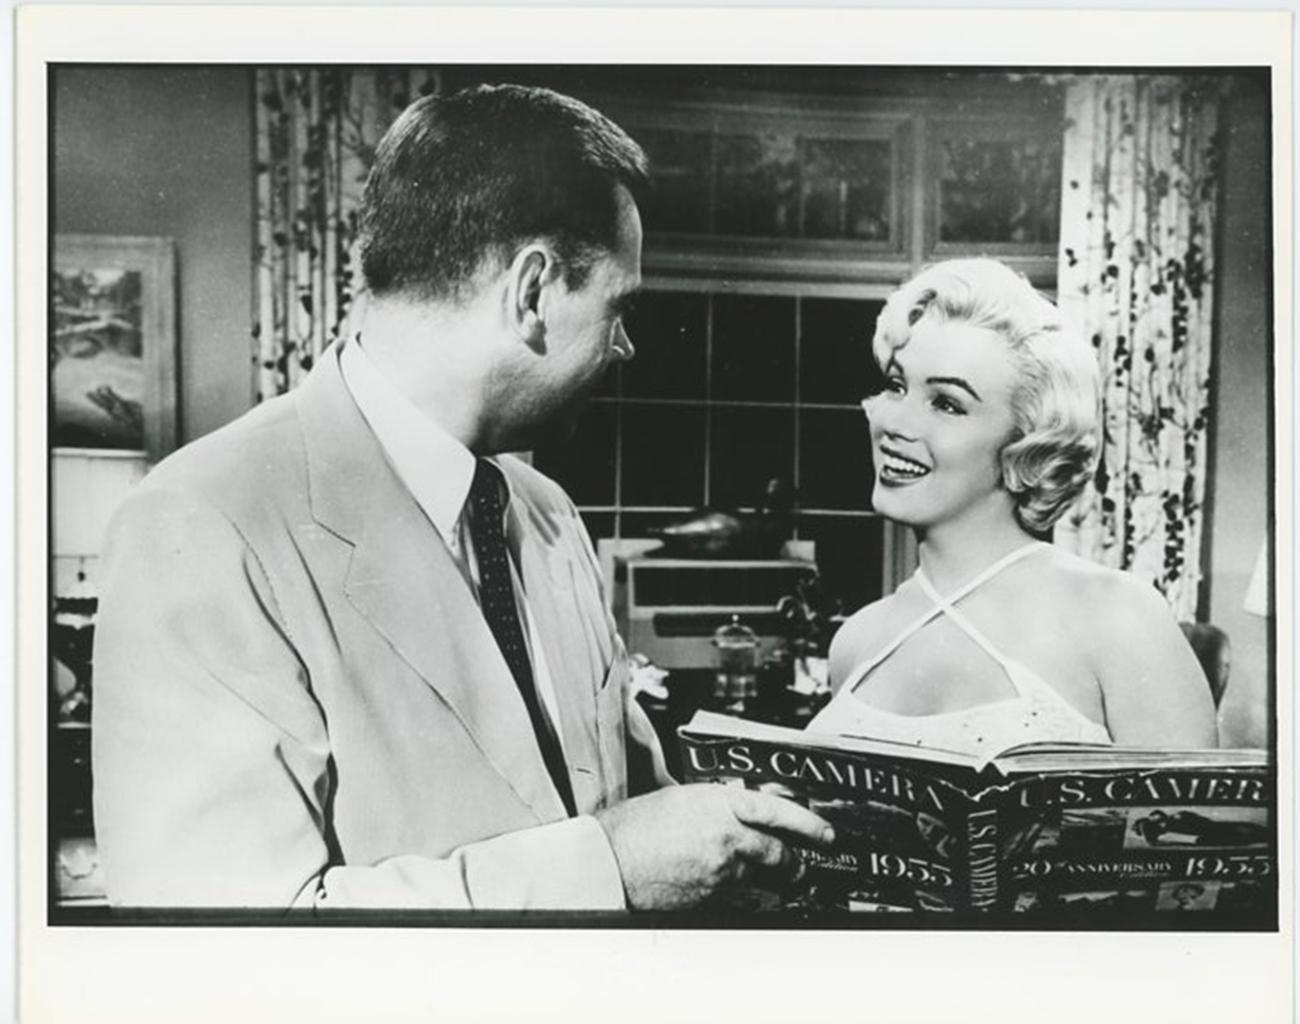 Unknown Black and White Photograph - Marilyn Monroe and Tom Ewell "The Seven Year Itch"